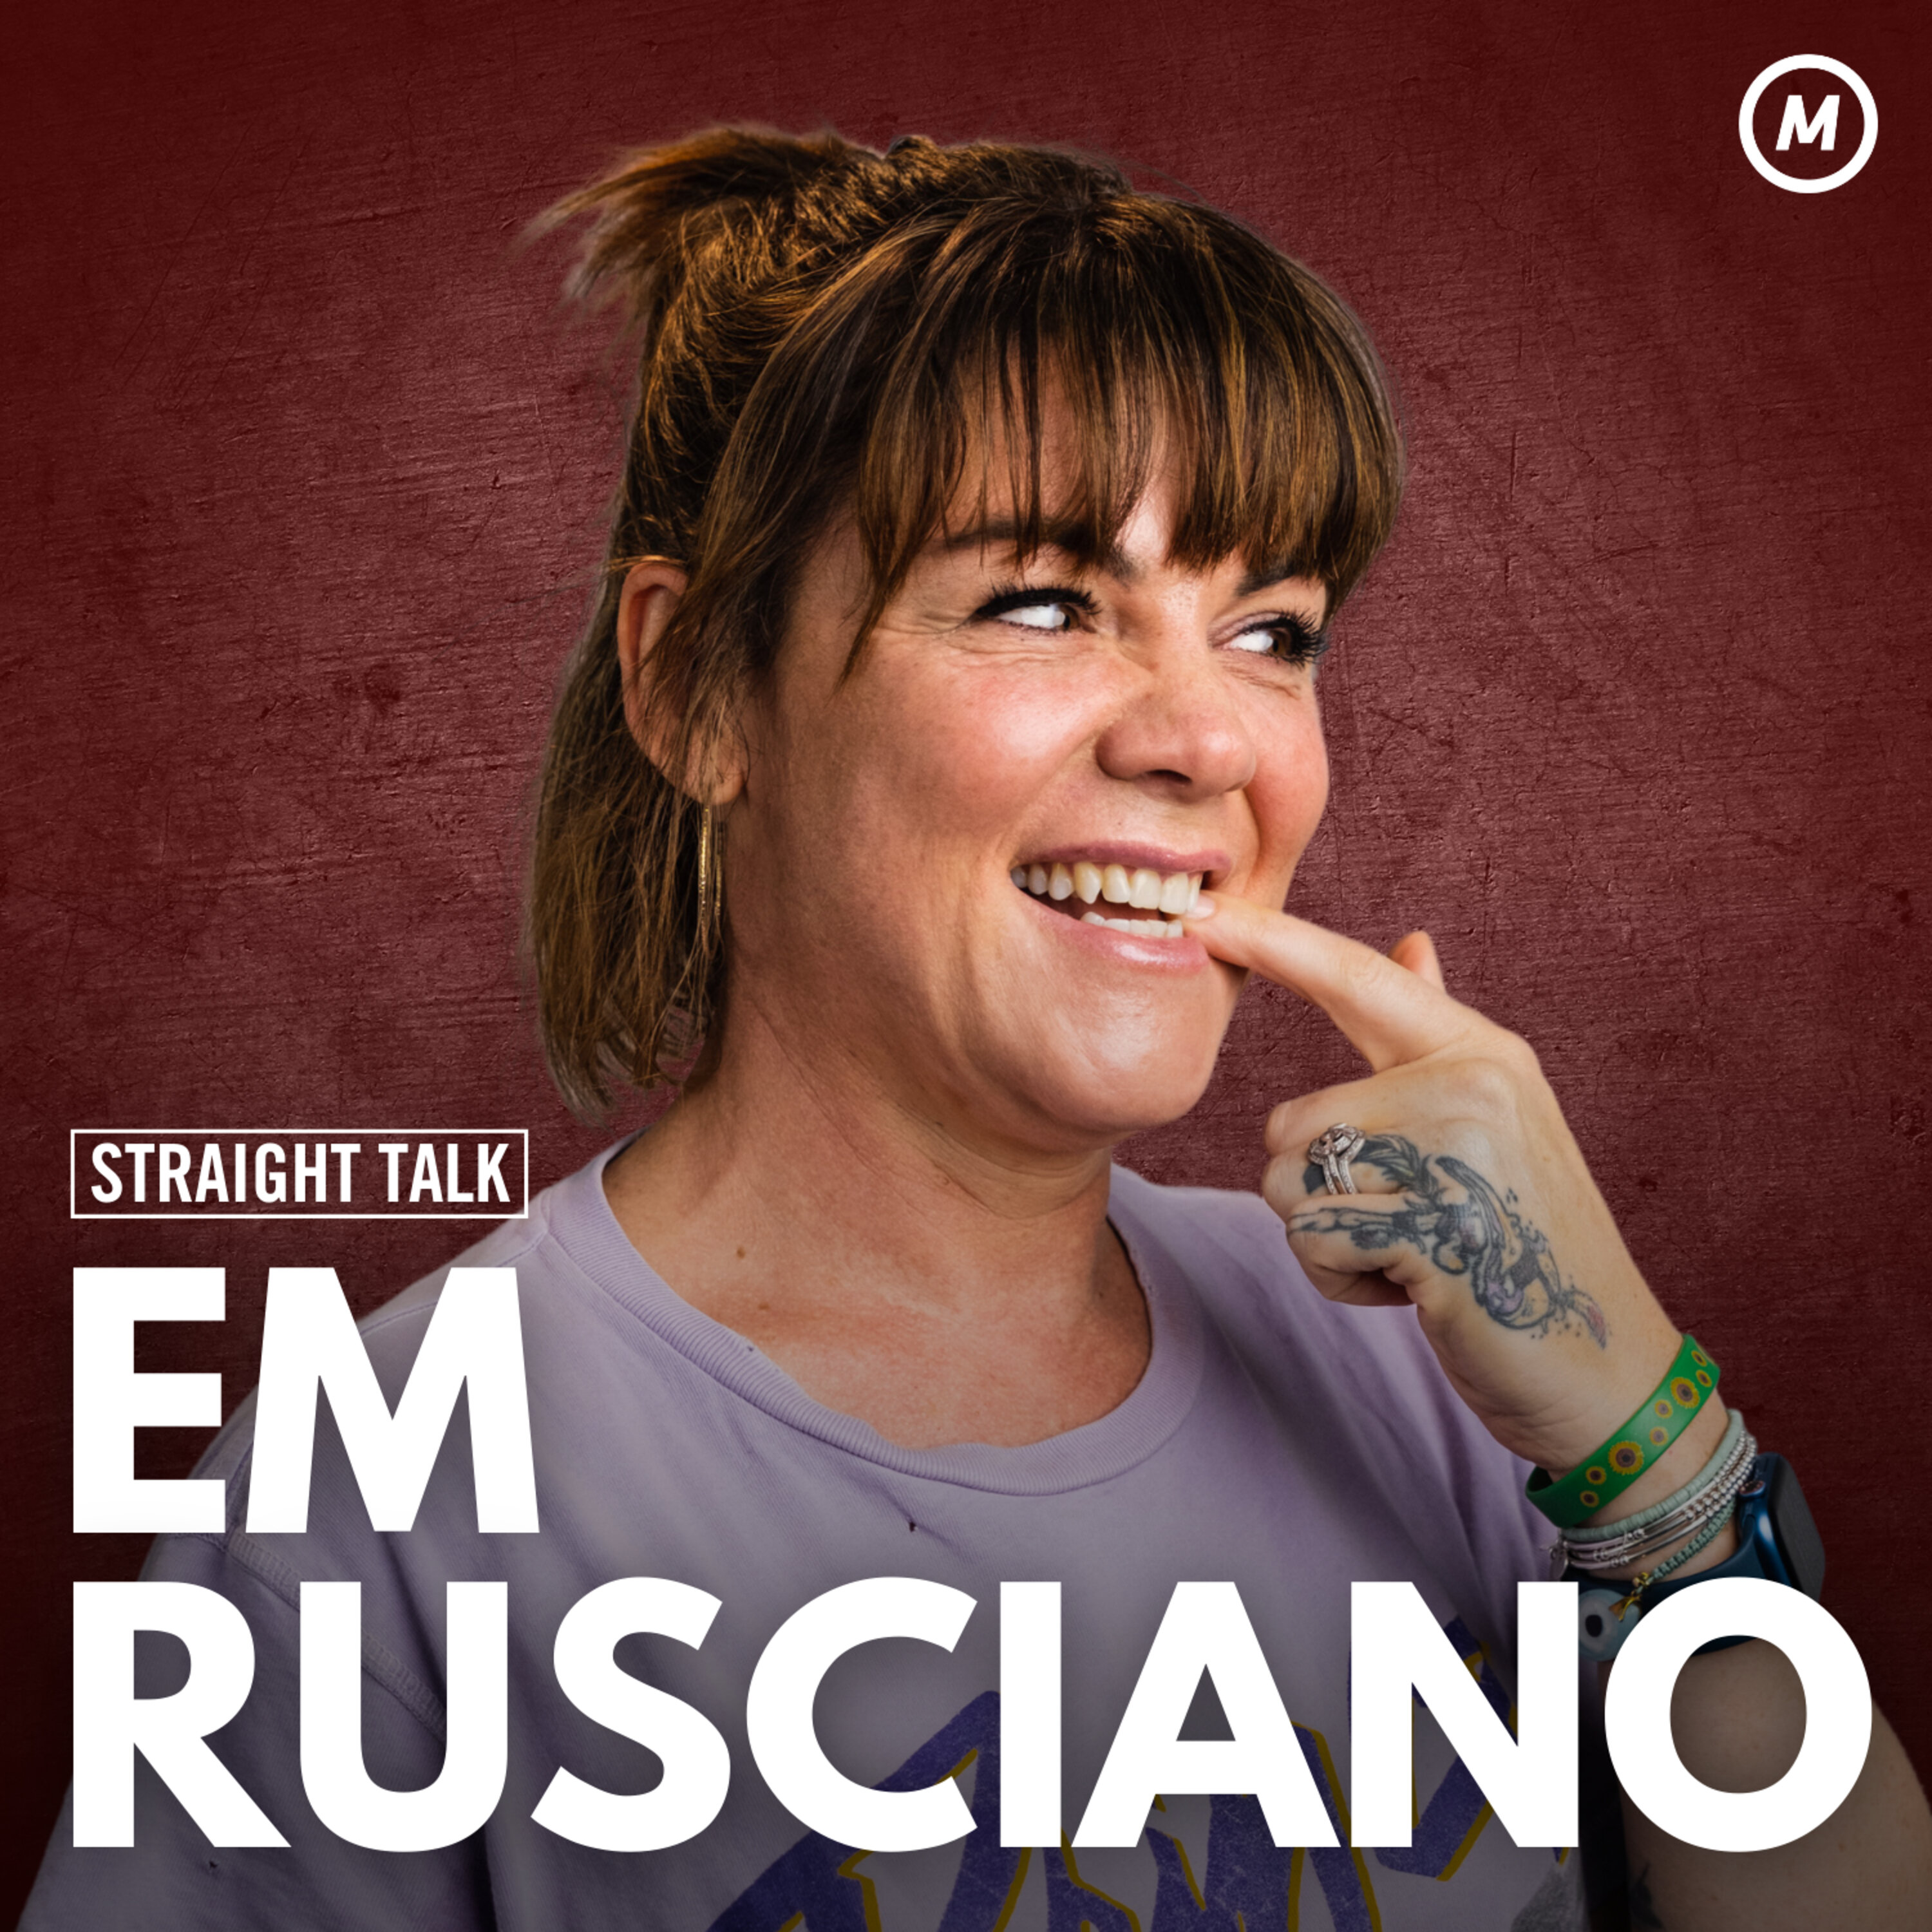 #51 Em Rusciano: All my life I've just wanted to be seen